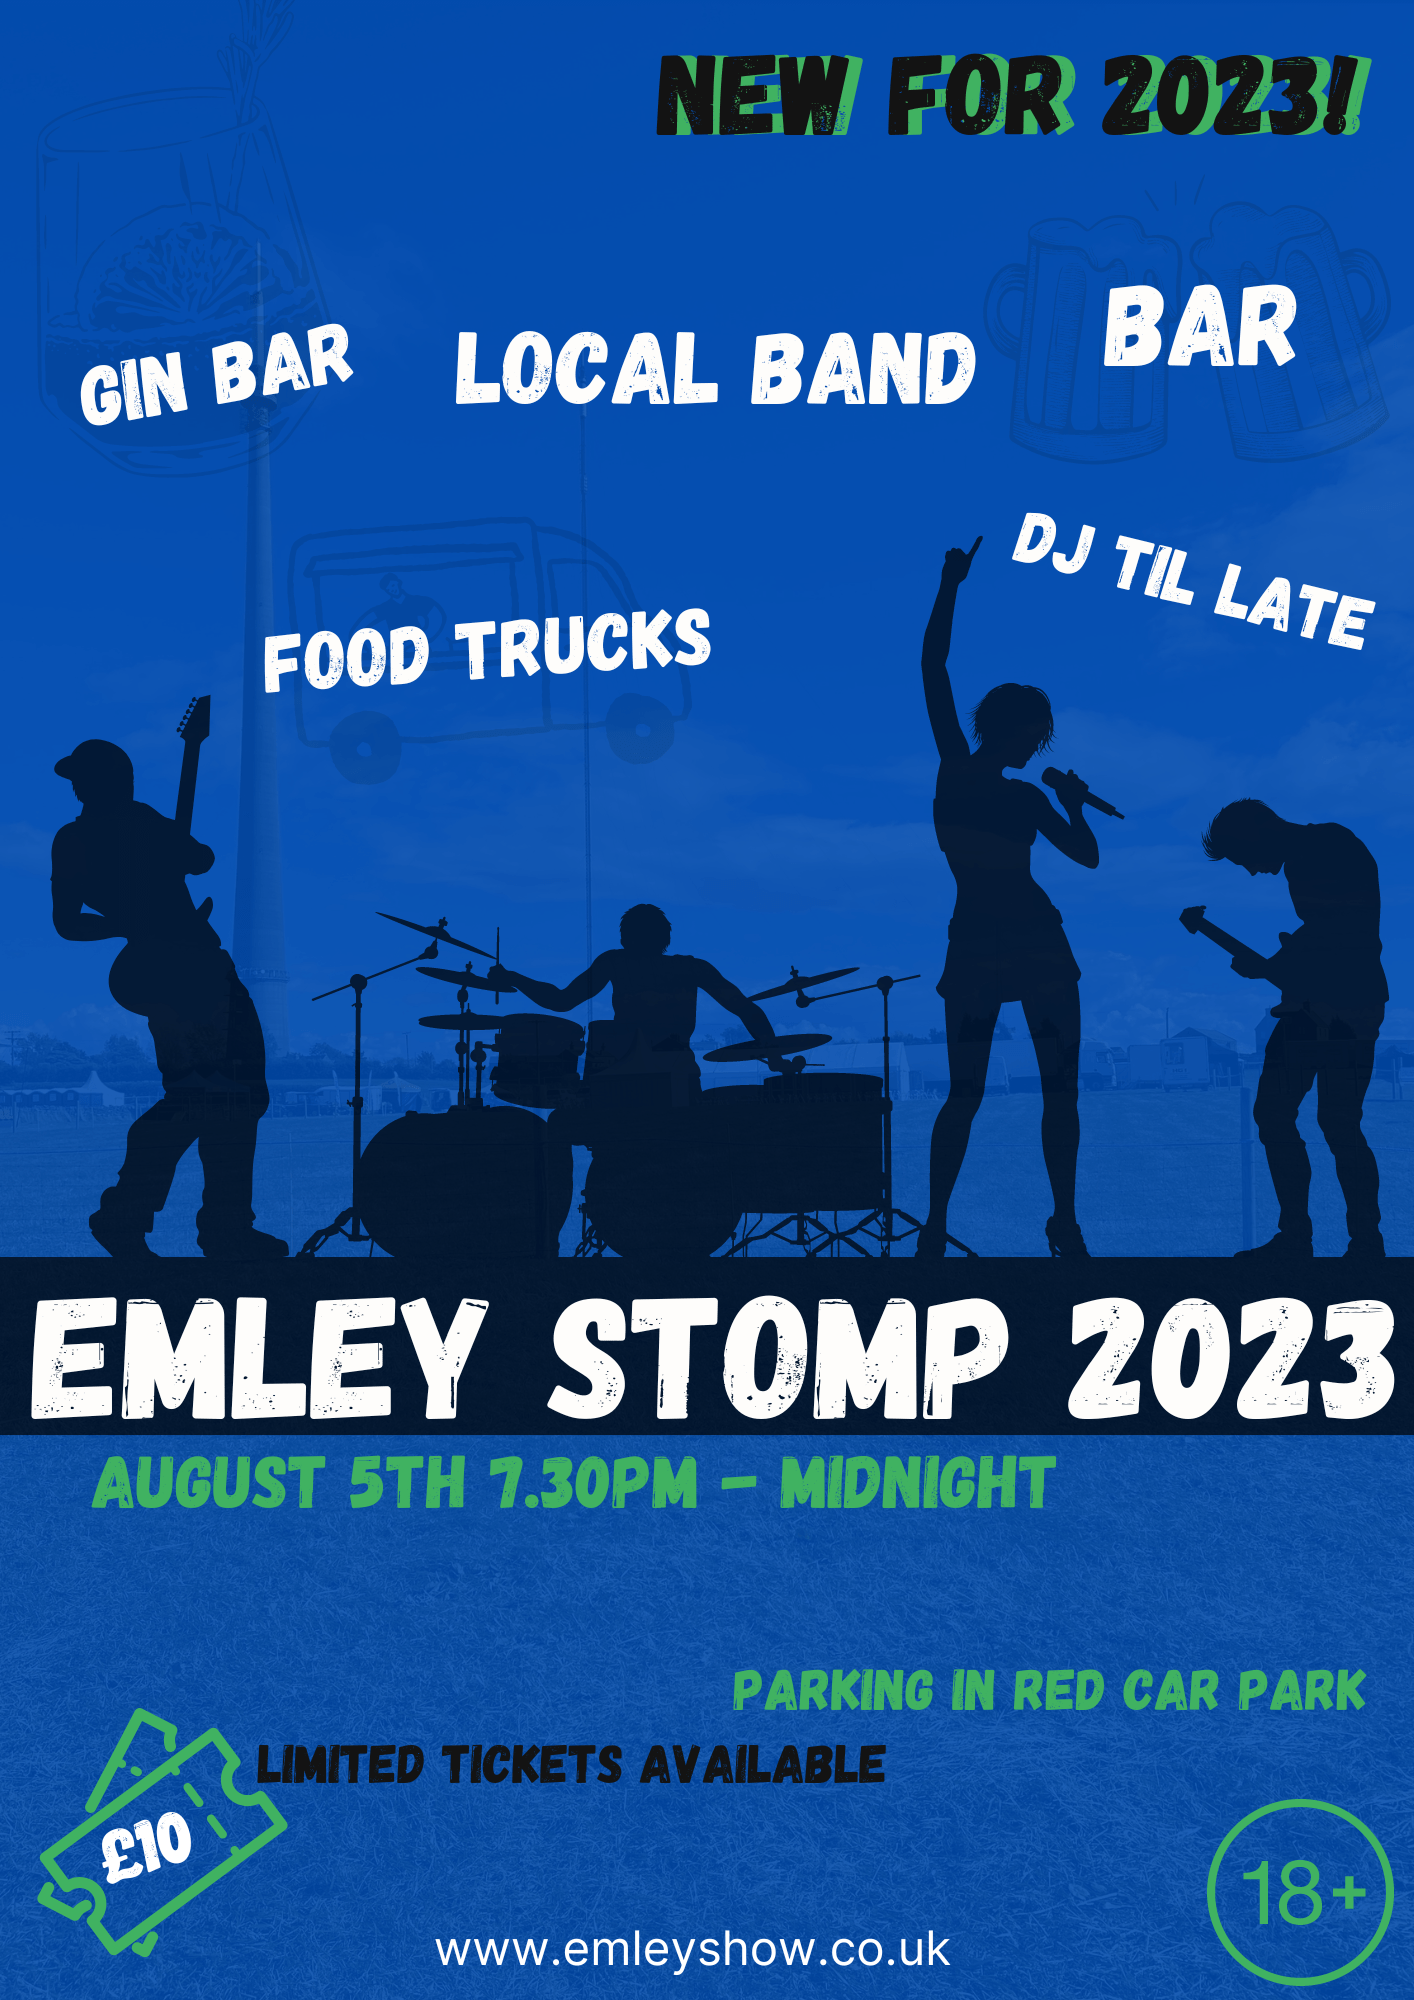 Emley Stomp August 5th 7:30PM-Midnight.  Parking in Red Car Park, Limited Tickets Available